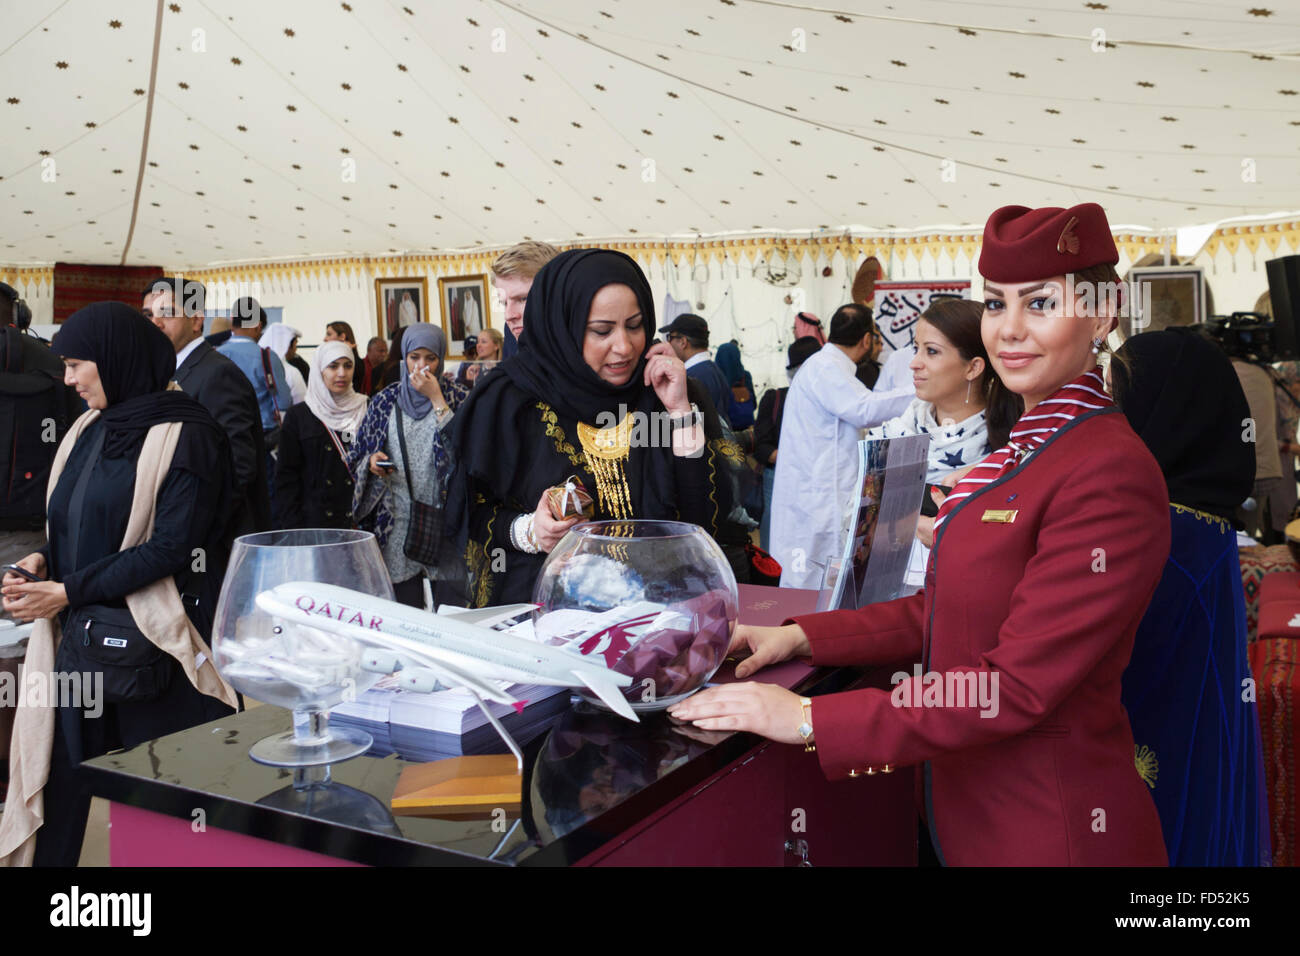 A Qata Middle Eastern cultural event, with Qata Airways, at the EID festival in London UK. Middle East. Arabian people. Stock Photo